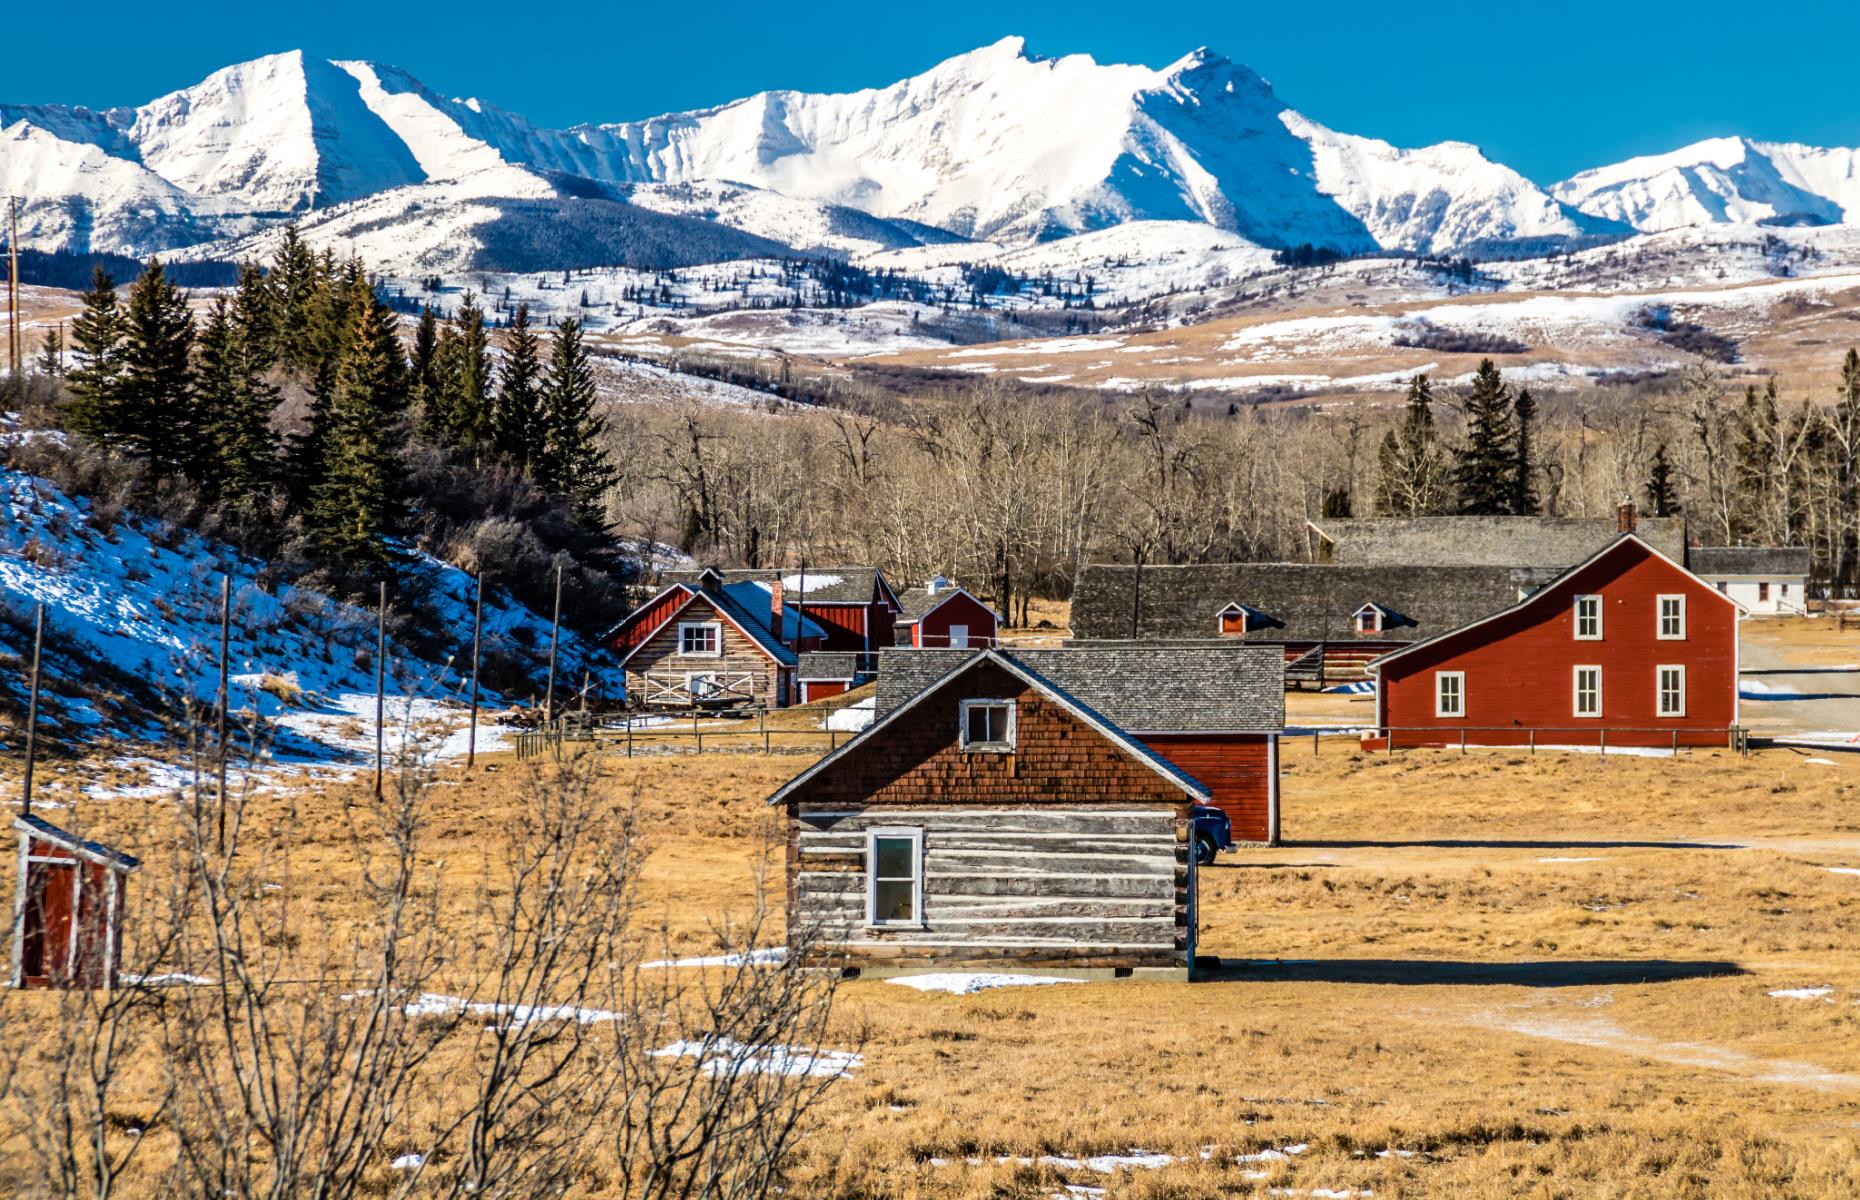 <p>Alberta’s <a href="https://www.pc.gc.ca/en/lhn-nhs/ab/baru">Bar U Ranch National Historic Site</a> offers a rare hands-on picture of Canada’s Wild West. The ranch dates back to the late 1800s and now offers interactive learning experiences to help visitors understand what life would have been like for Western Canada’s pioneering cowboys and cattle ranchers. The ranch is near the village of Longview, in the heart of Alberta’s still very active cattle ranching country.</p>